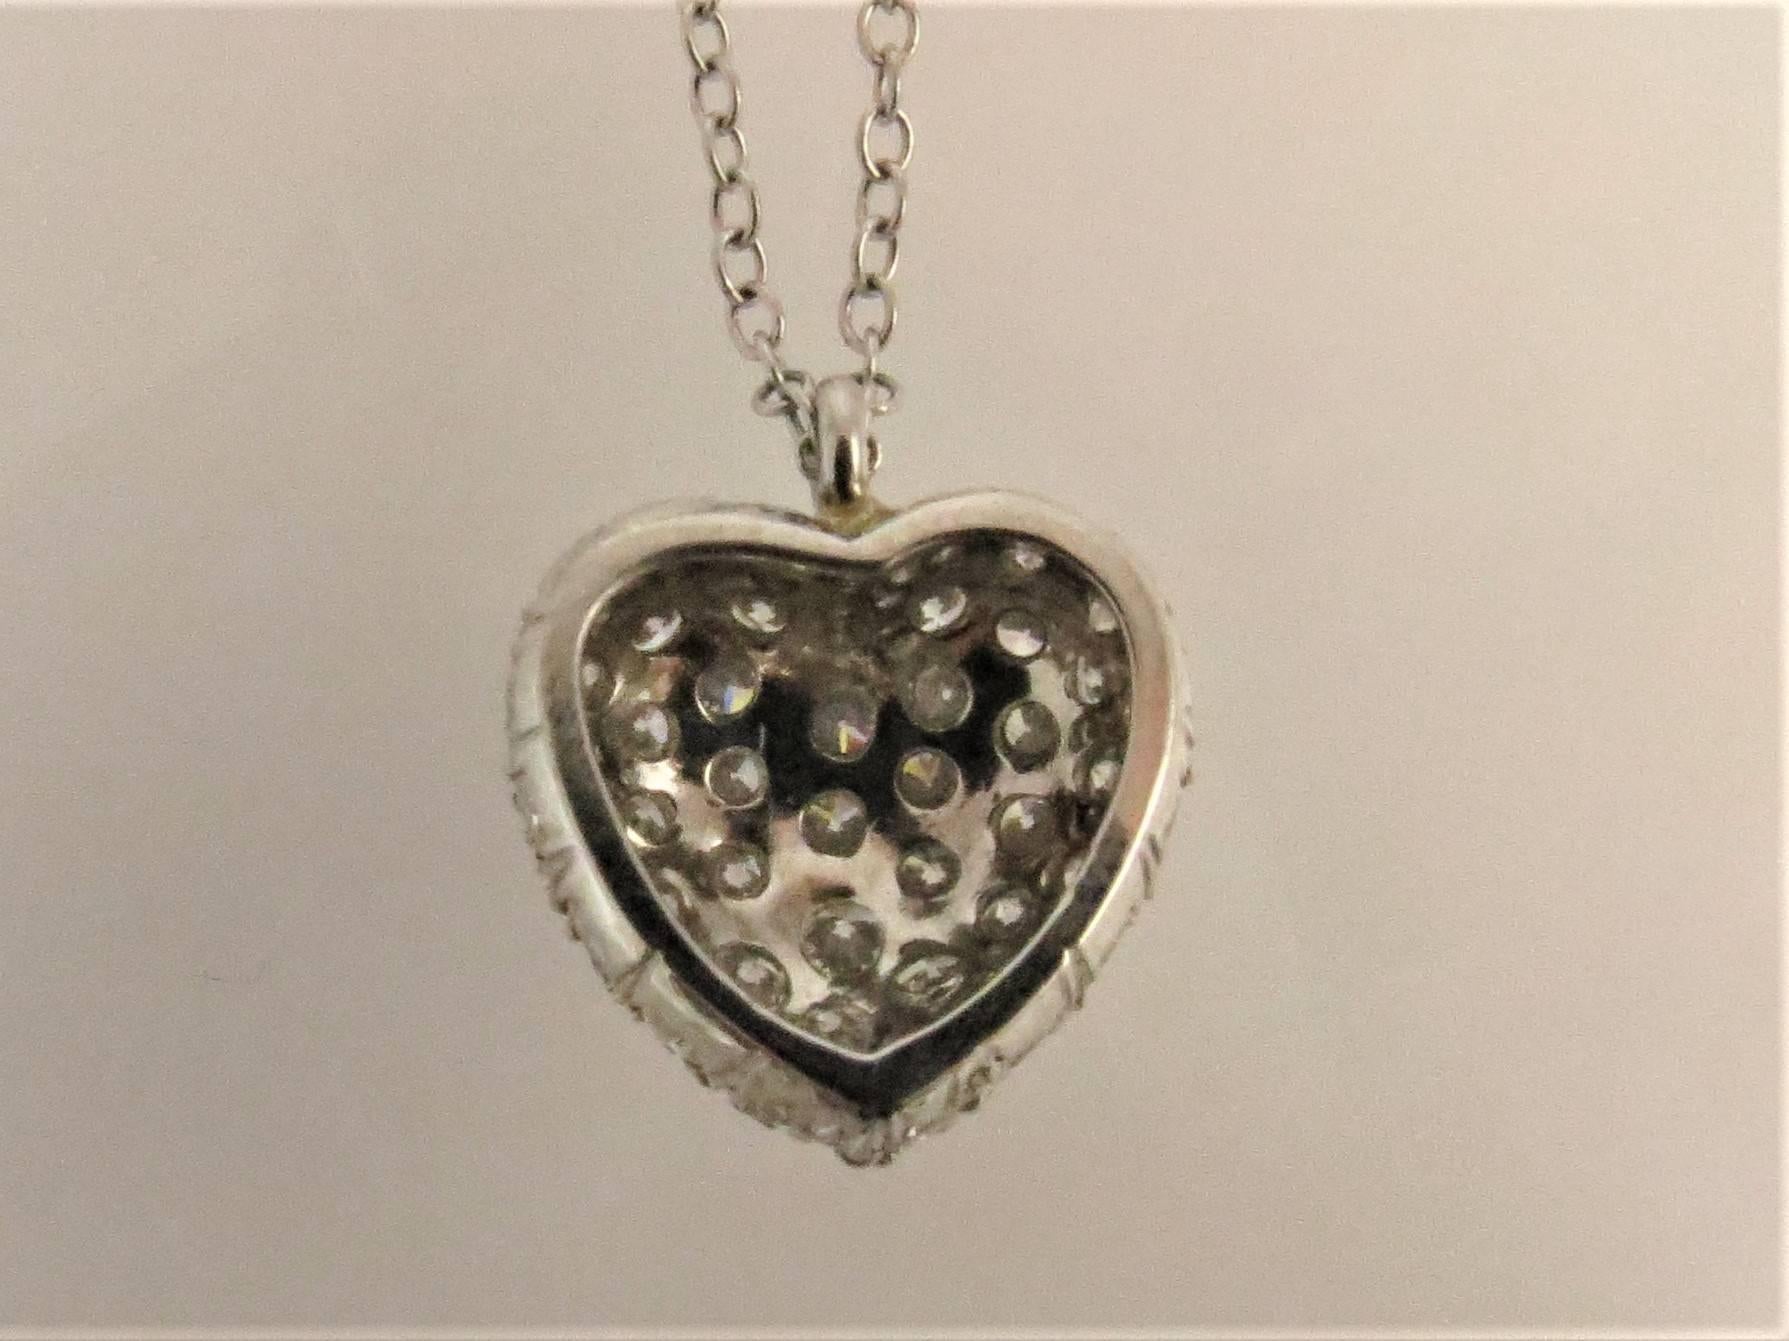 18K white gold diamond heart pendant  pave set with 41 full cut round diamonds weighing 1.80cts, G-H color, VS-SI1 clarity, suspended from 16 inch white gold chain.